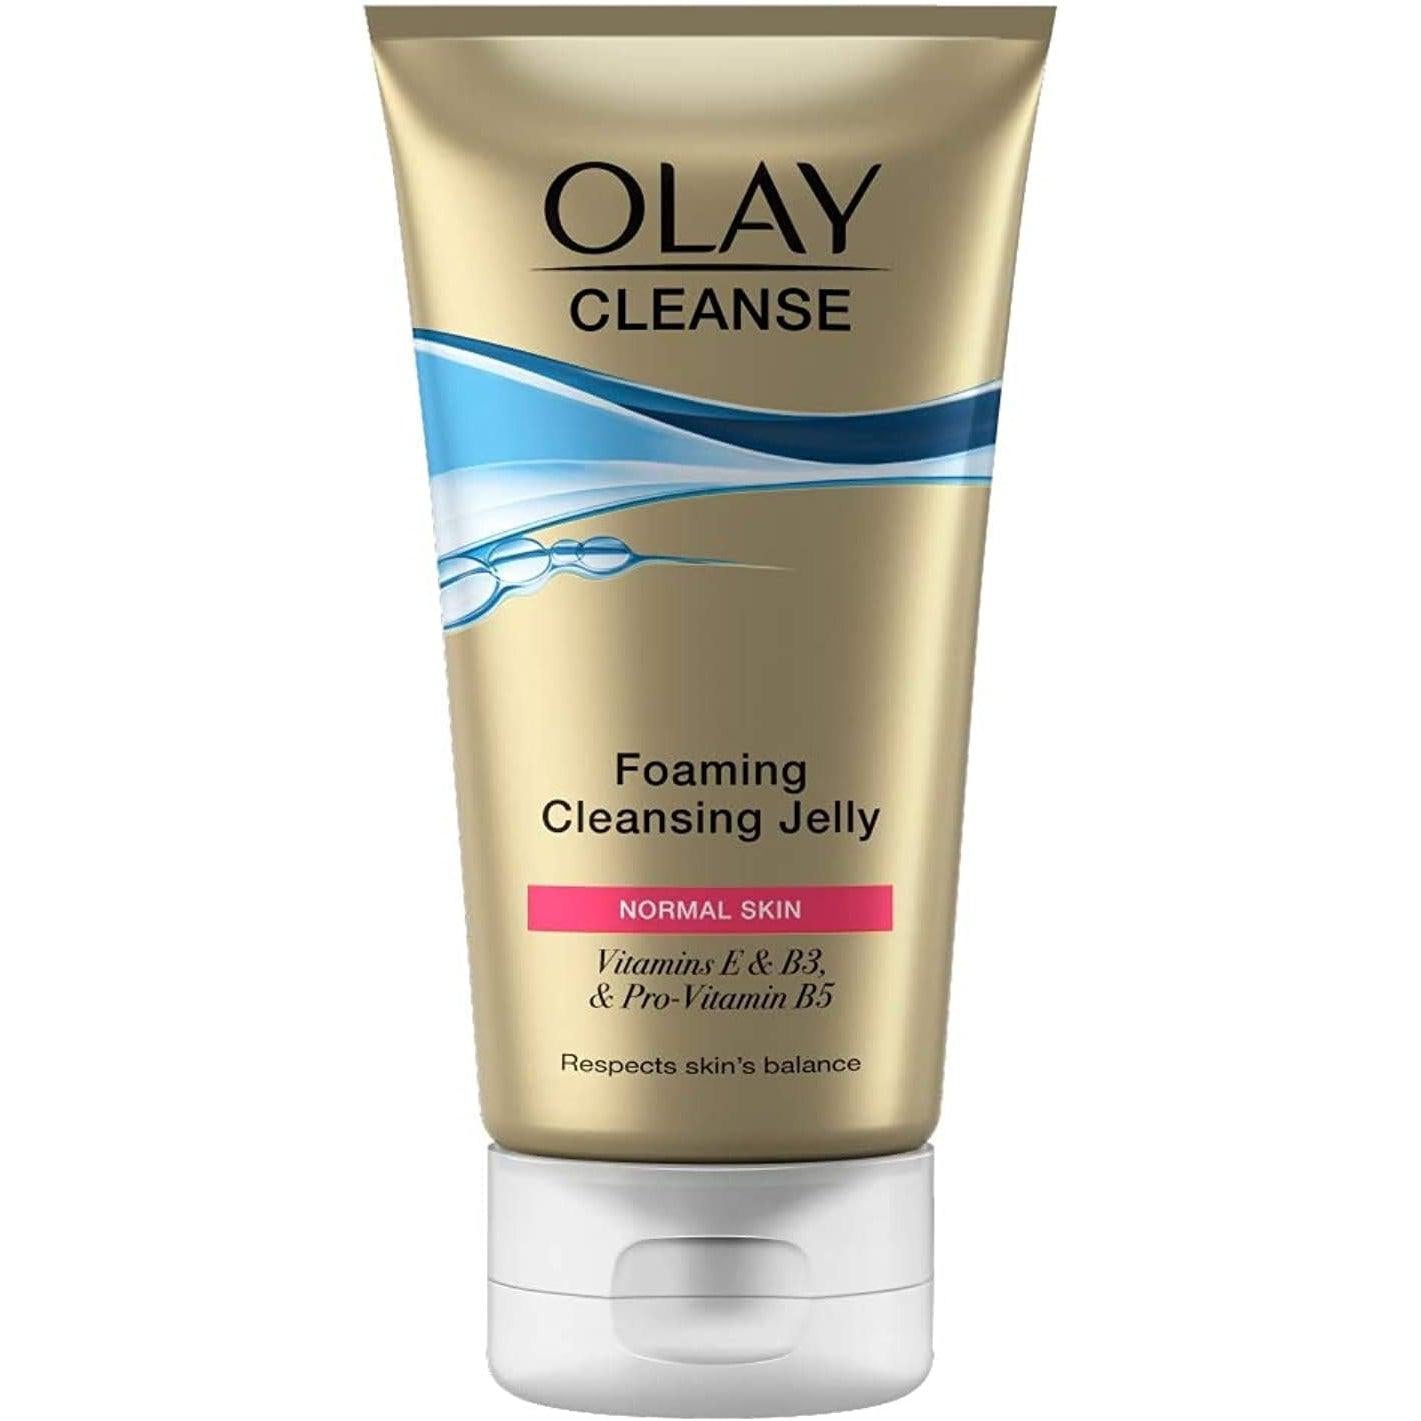 Olay Cleanse Foaming Cleansing Jelly Normal Skin, 150ml - Healthxpress.ie